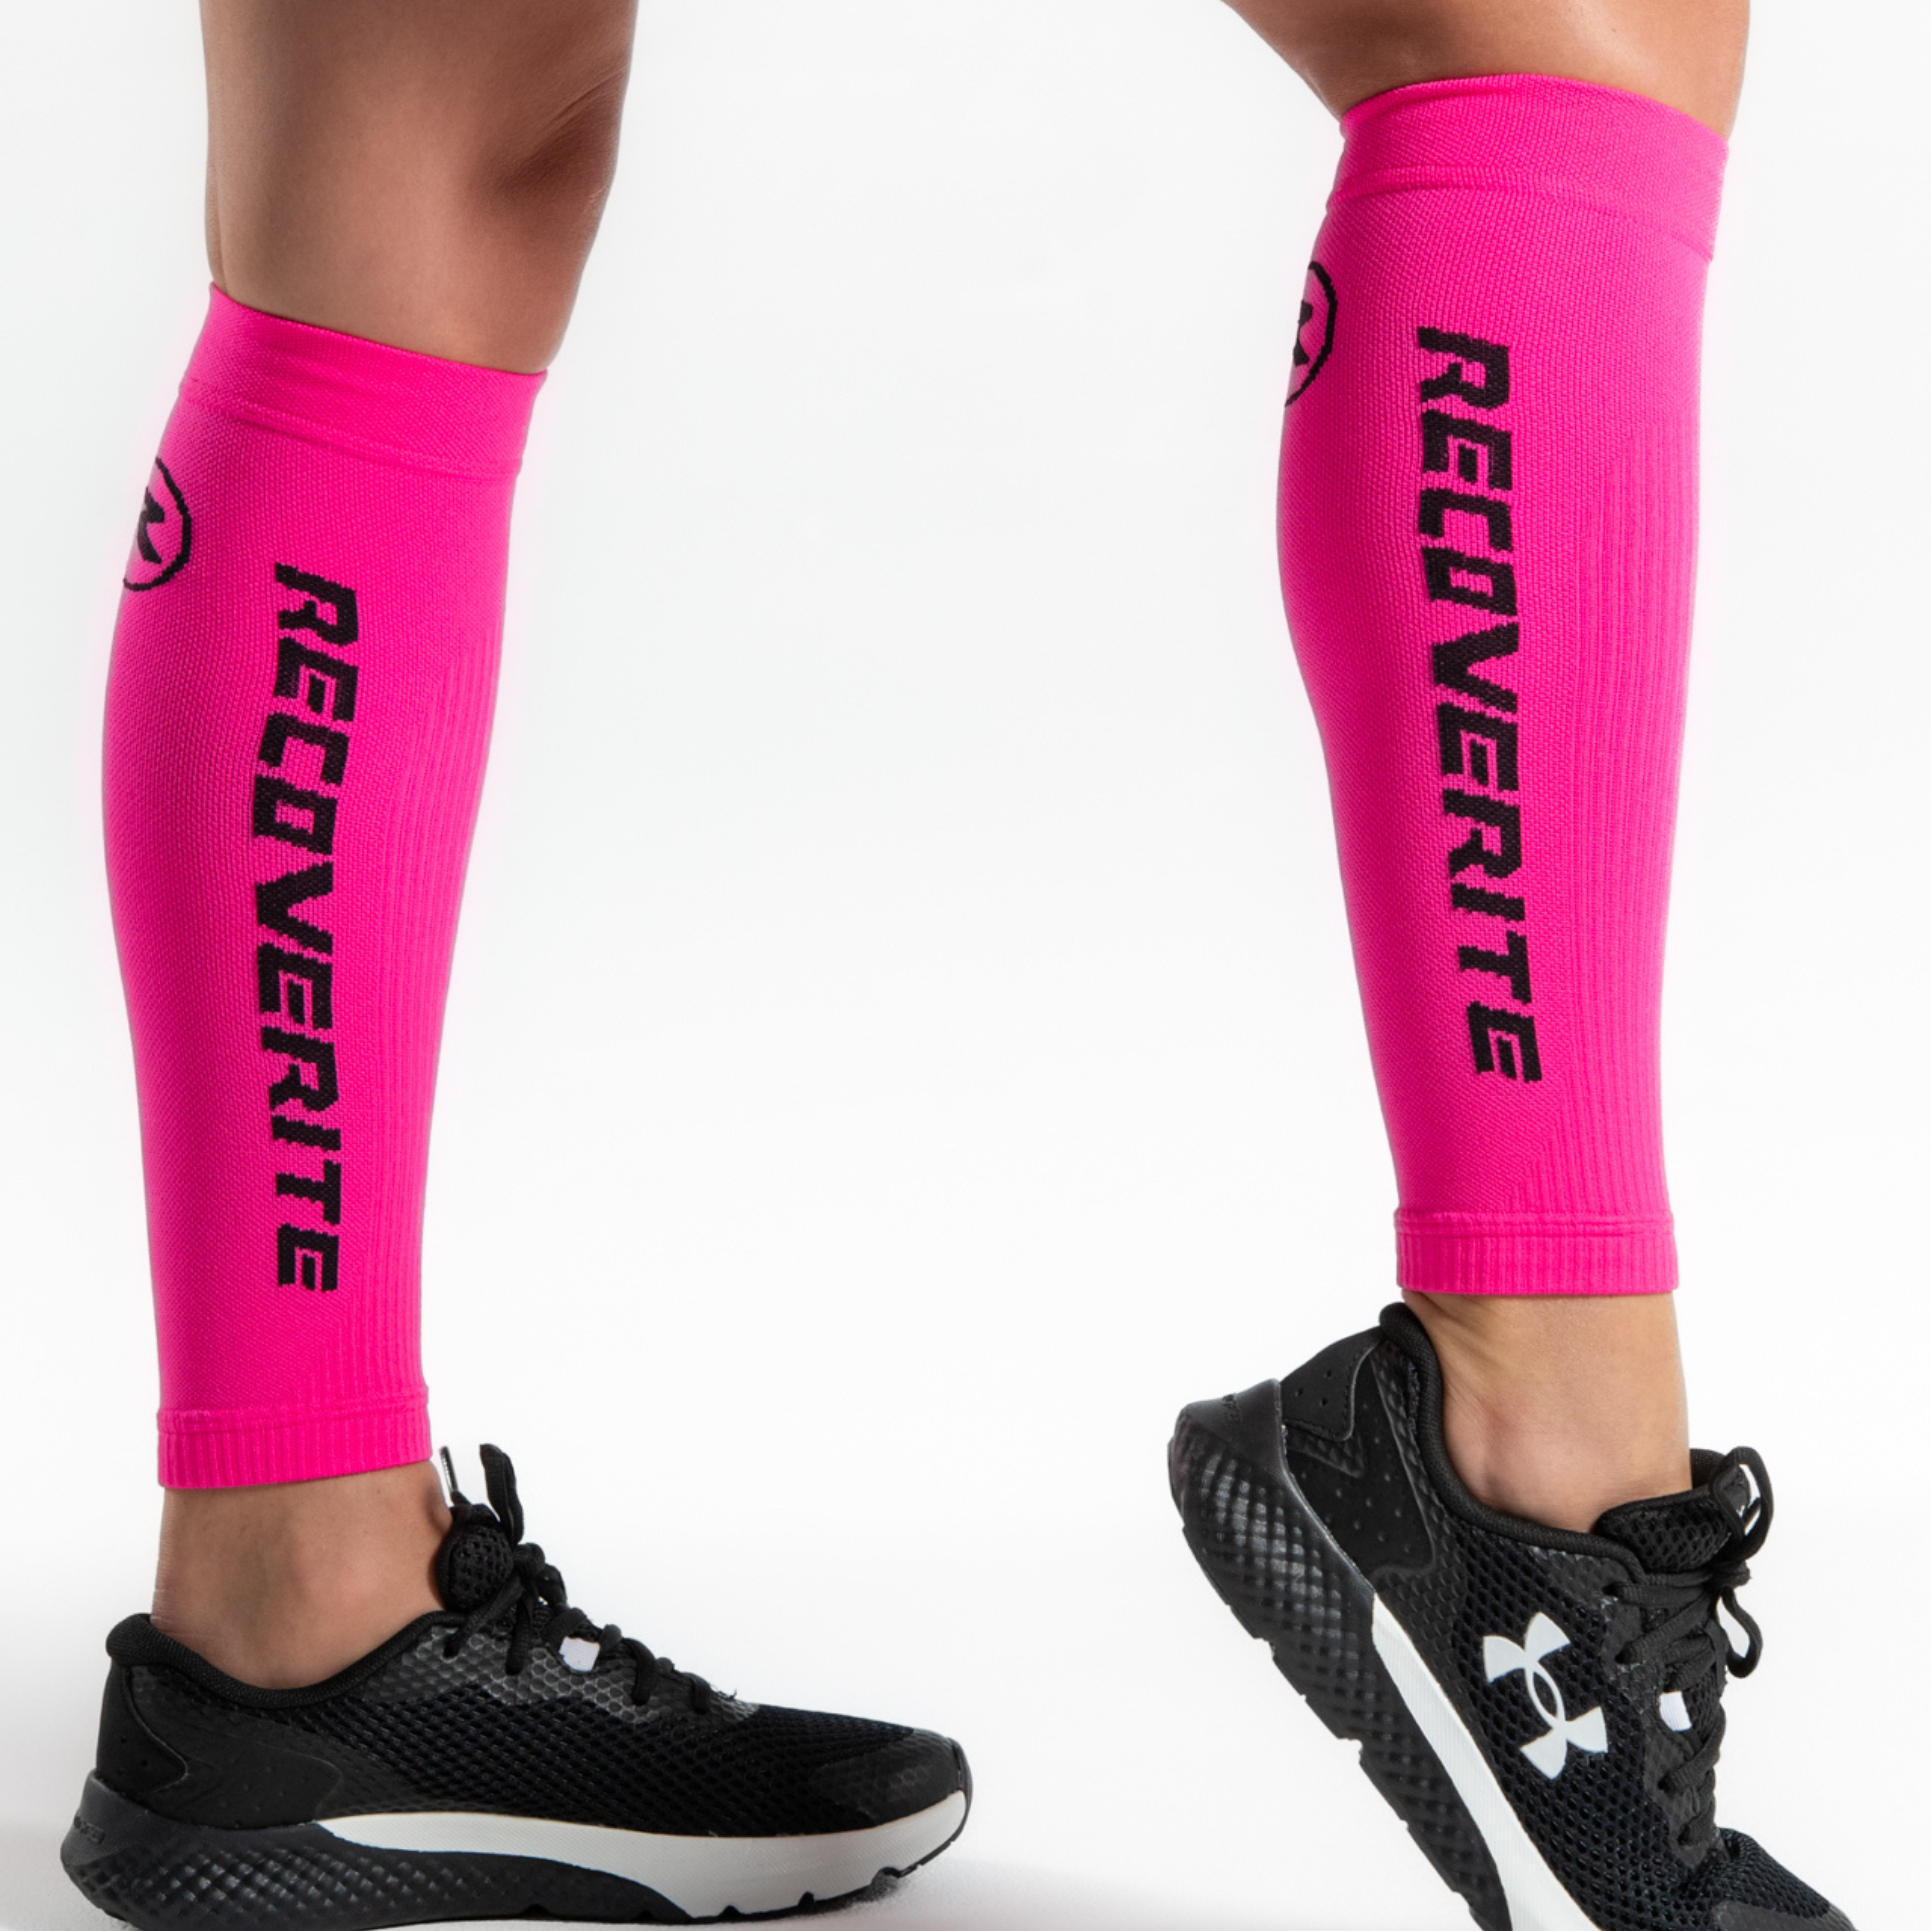 RECOVERITE - Medical Grade Compression Socks with Ice/Heat Gel Packs – The  WOD Life